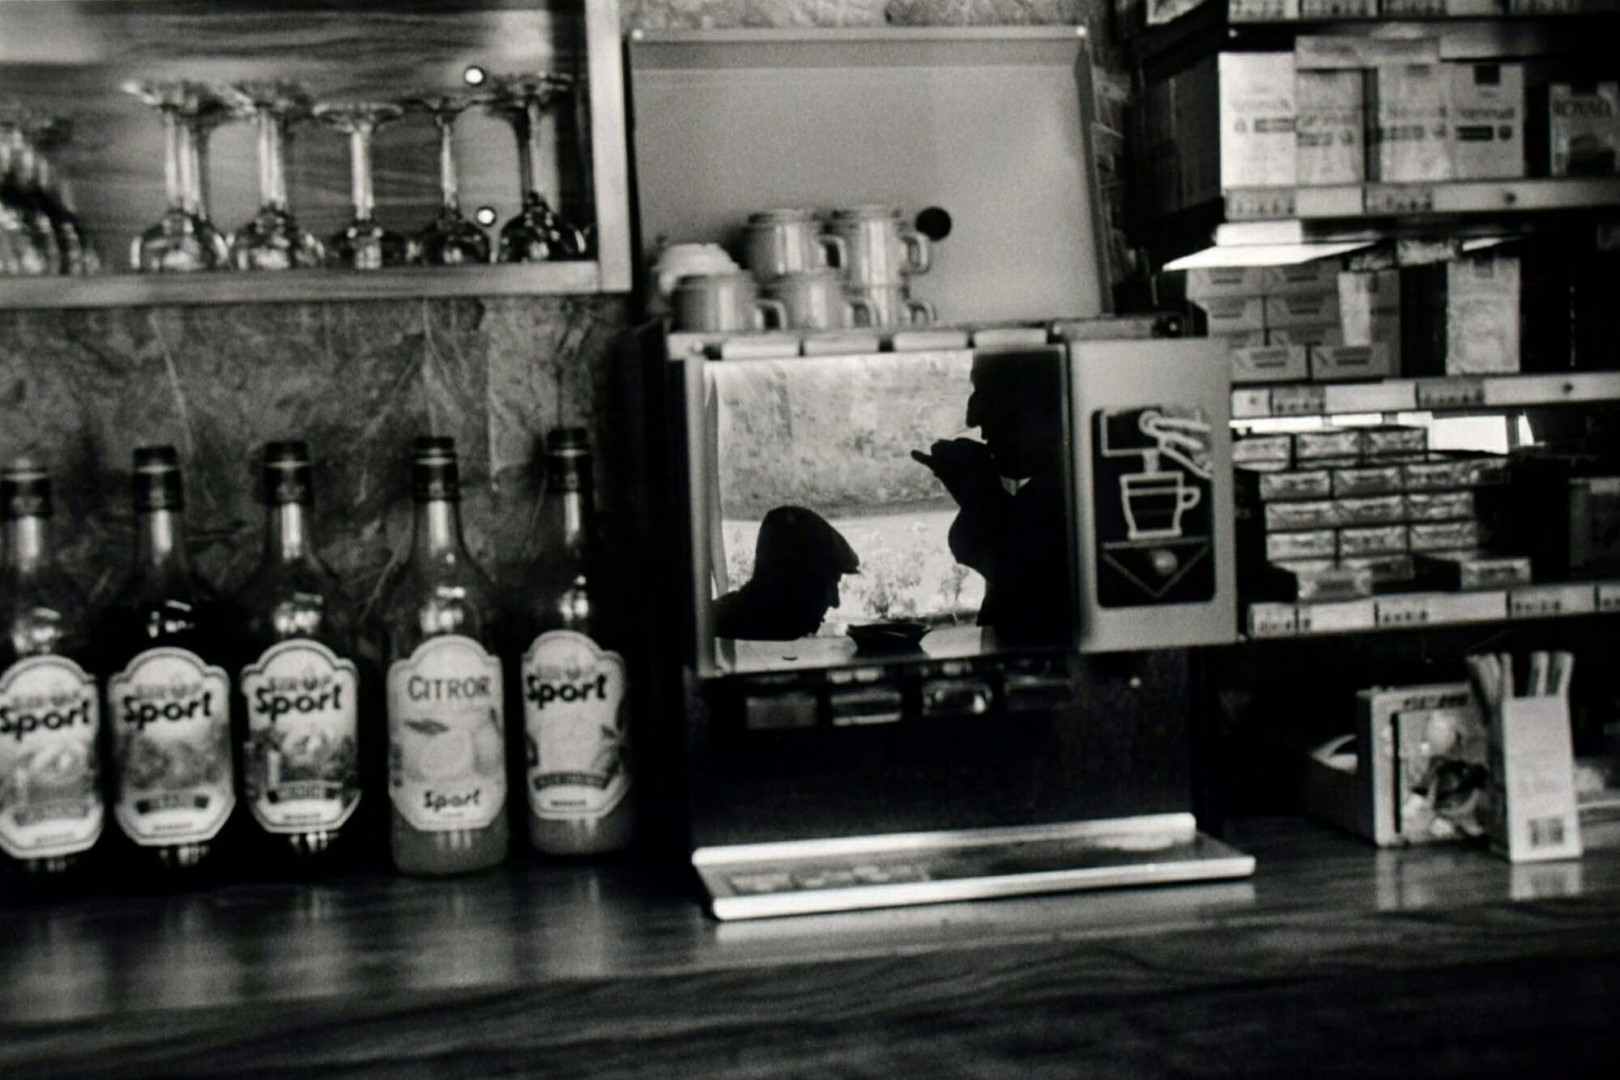 <span style="font-weight:normal;">Café in Brittany, 1992</span>